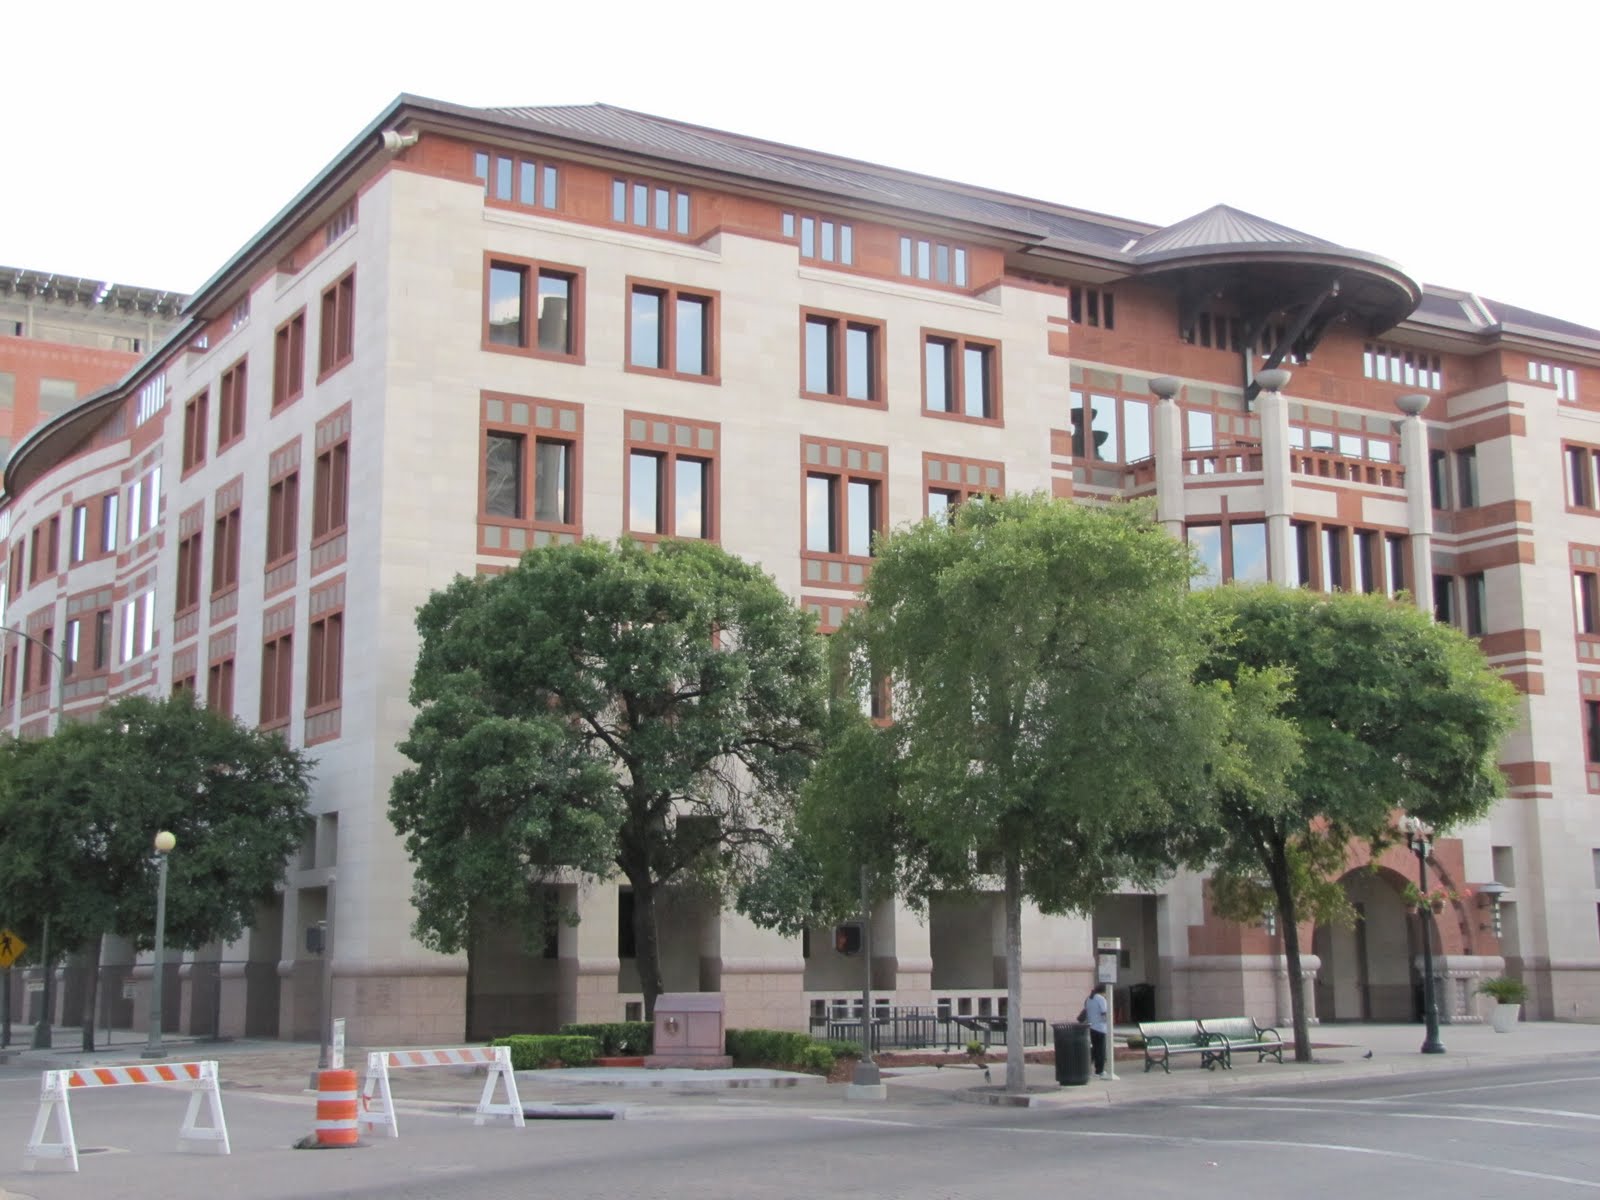 Photo of Cadena-Reeves Justice Center - Seat of Fourth Court of Appeals in San Antonio, Texas